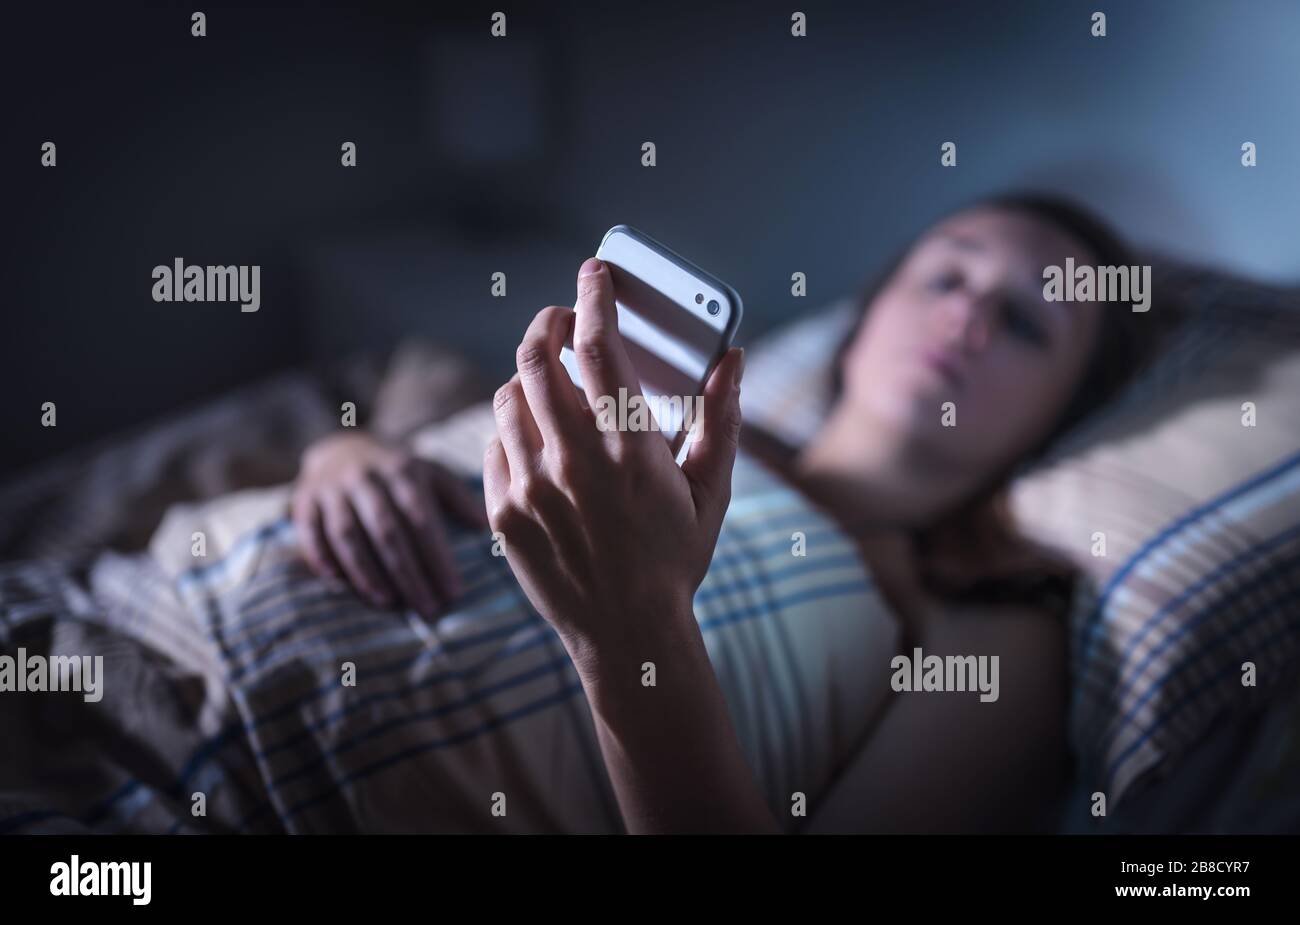 Sad upset woman looking at smartphone at night in bed. Phone call from unknown caller. Sleepless person suffering from stress or insomnia. Stock Photo